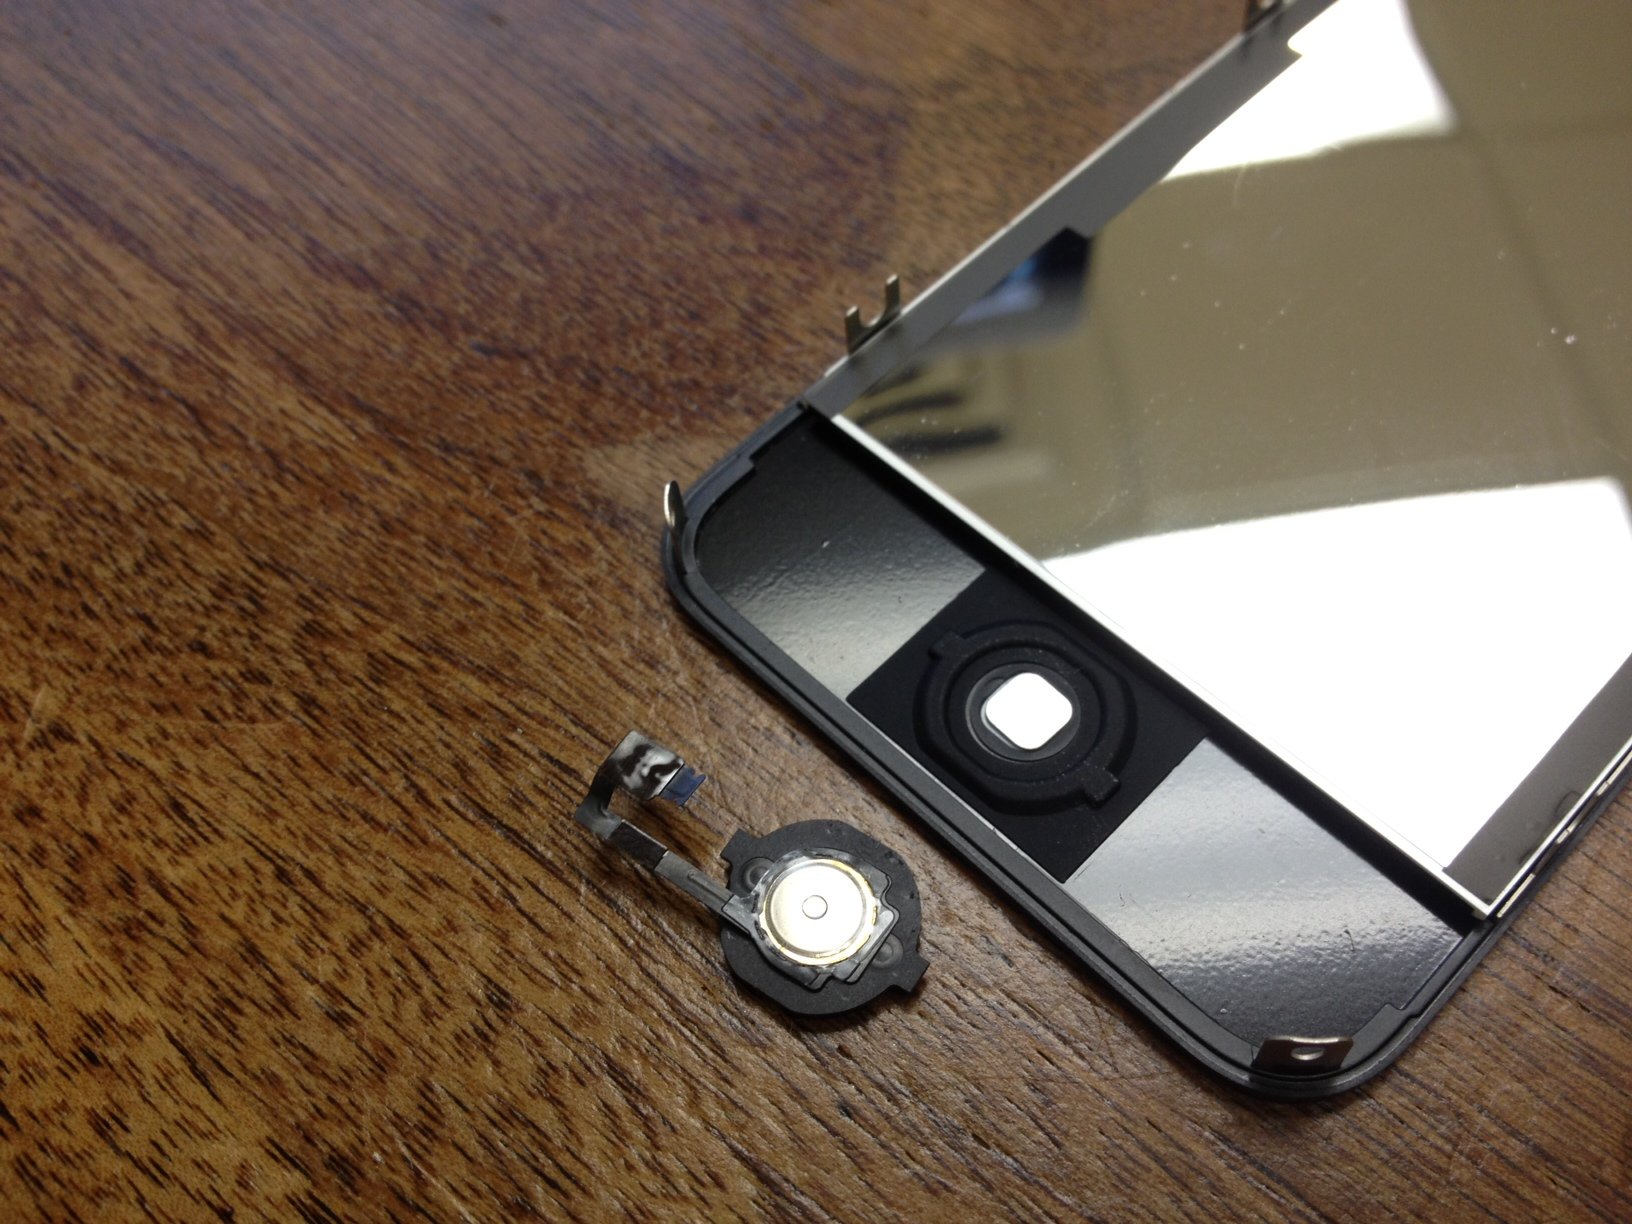 4S and 4 home button assemblies